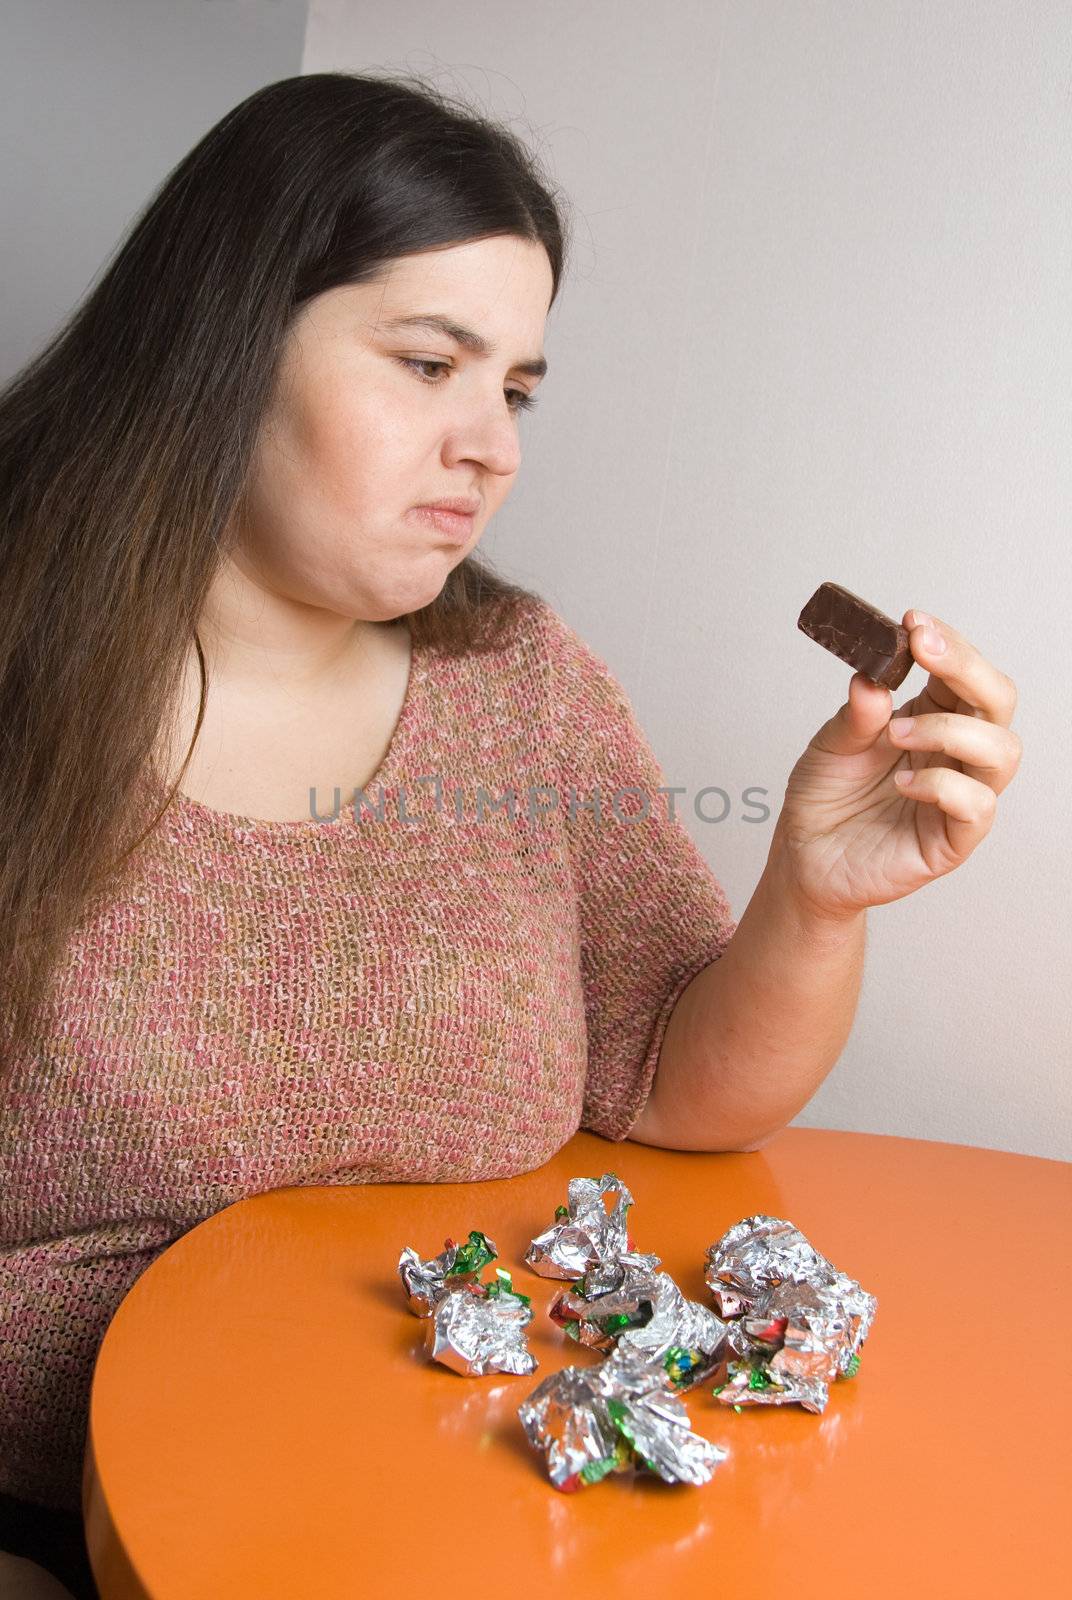 Stout woman contemplating over wrappers of sweets